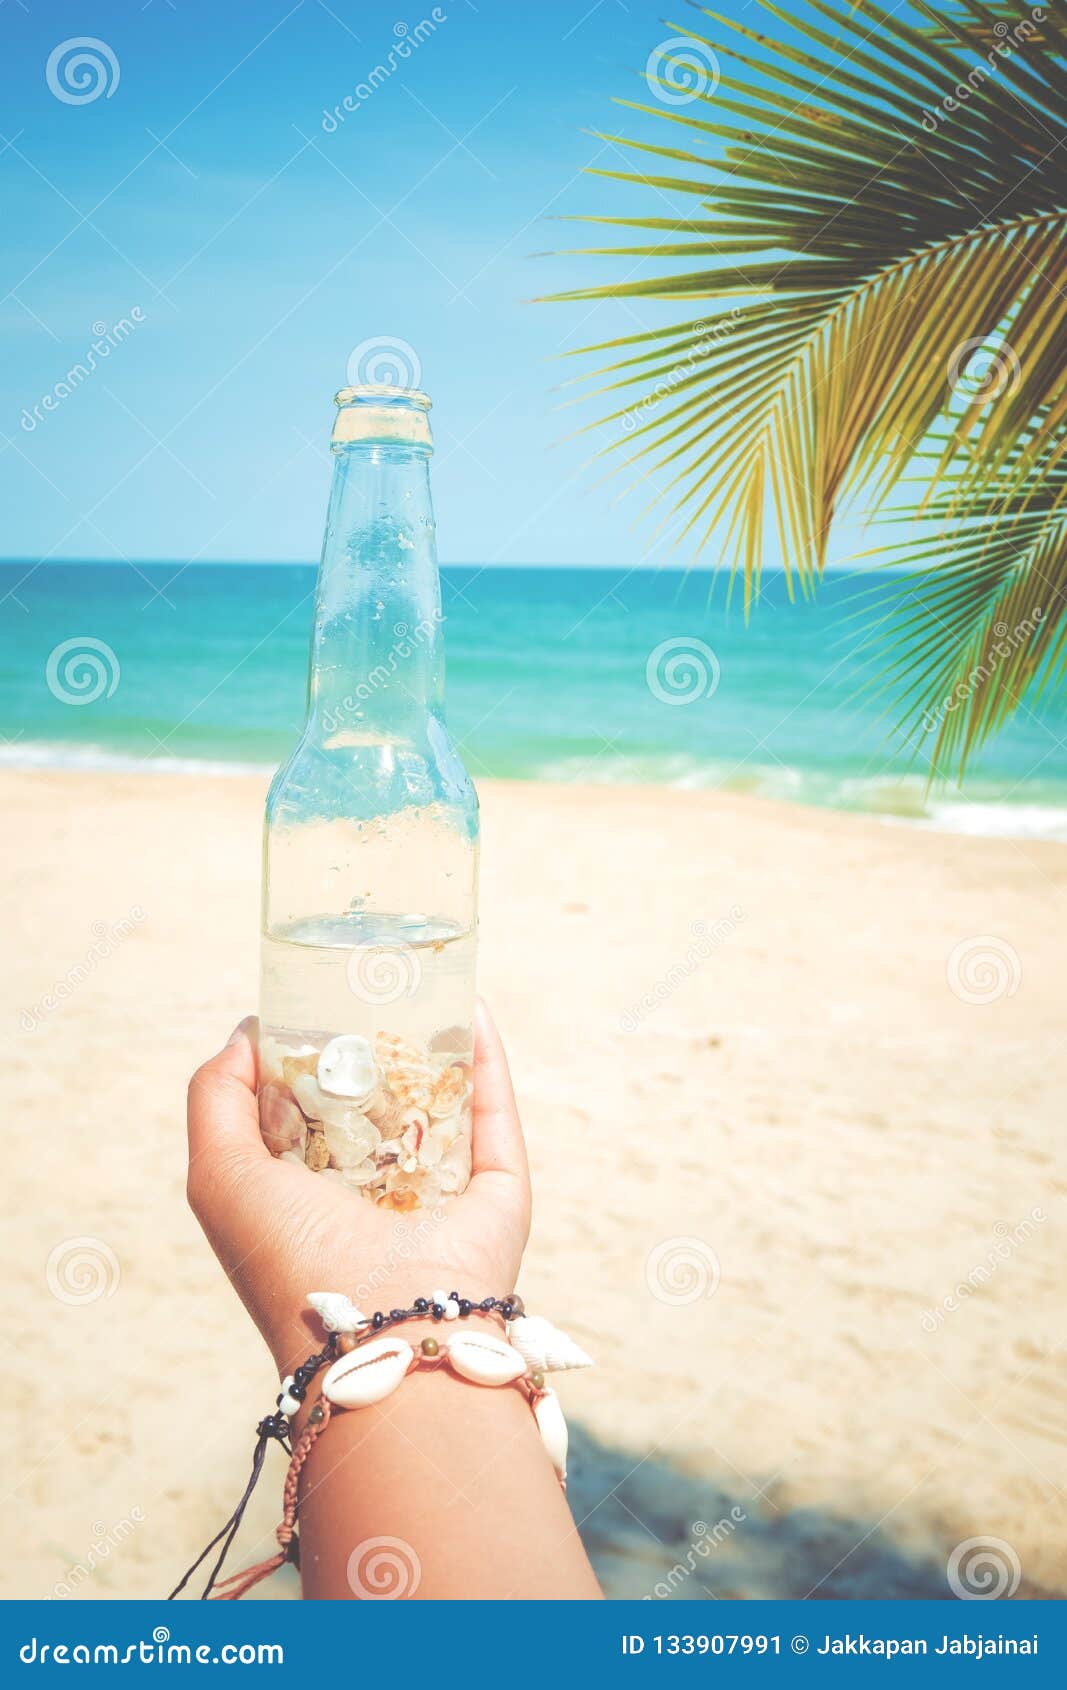 Relaxation and Leisure in Summer Stock Image - Image of collecting